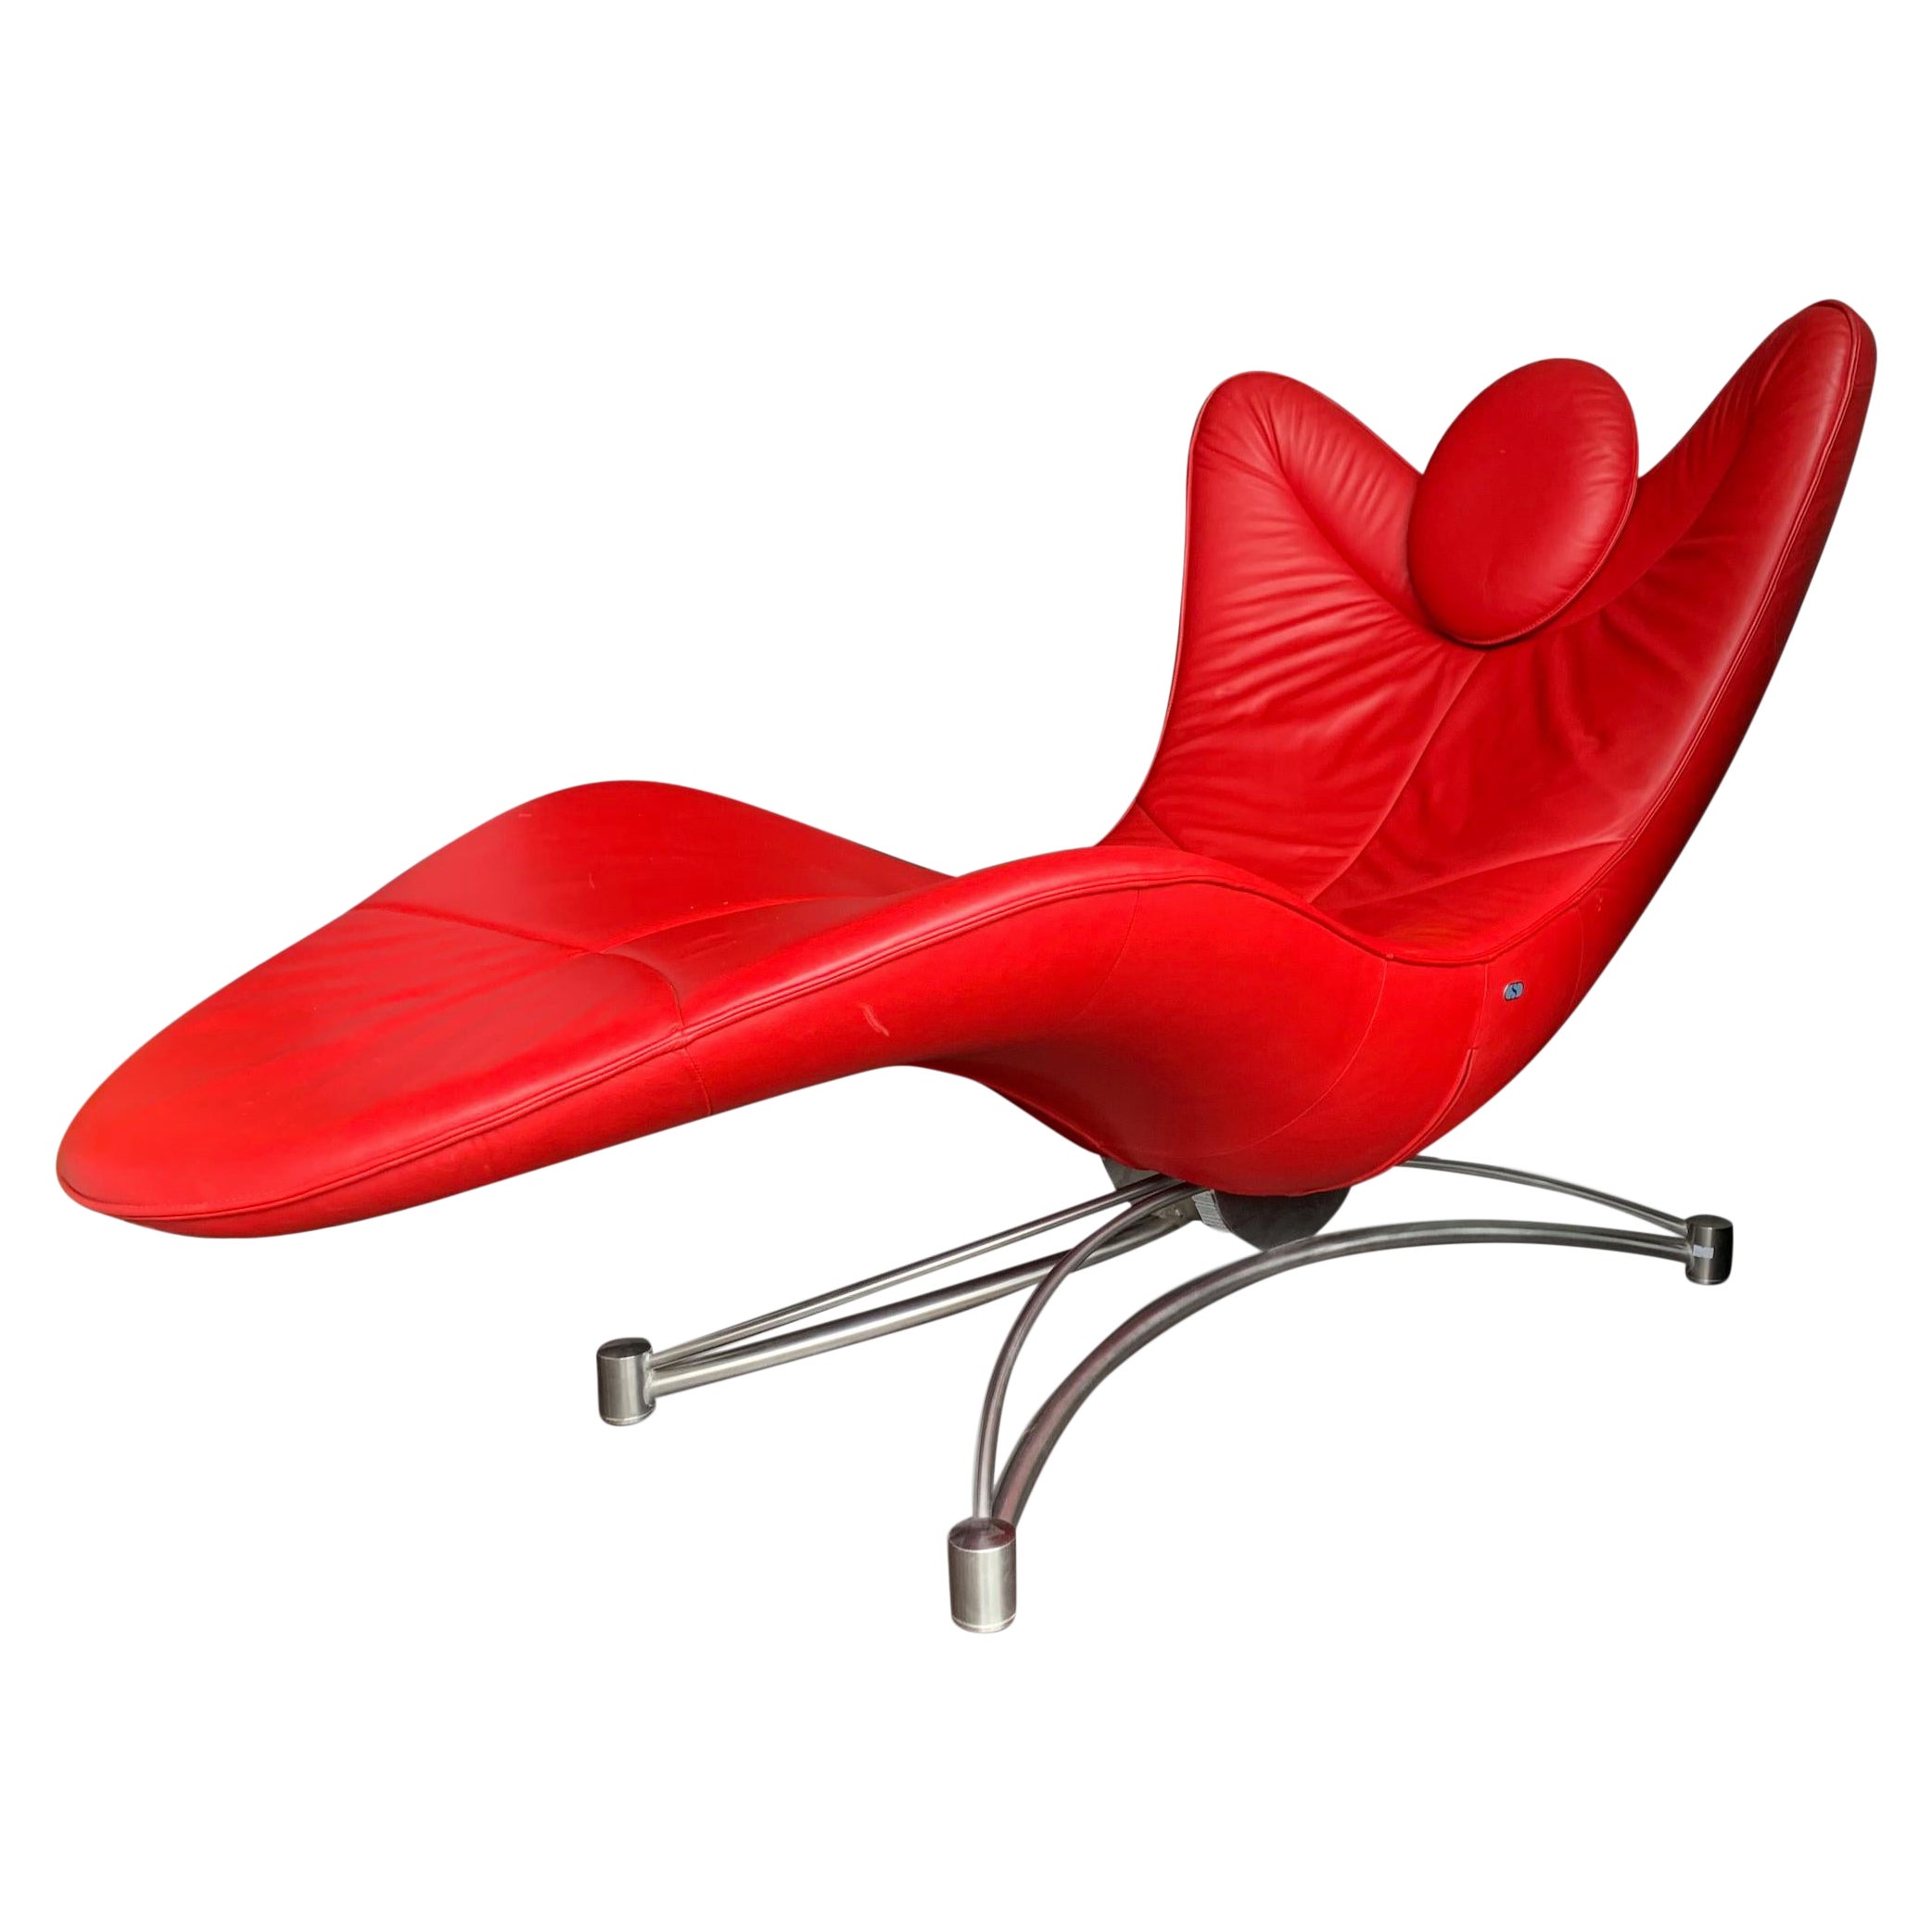 Iconic De Sede red leather & steel Chaise Lounge model Ds 151 made in Switzerland designed by Jane Worthington
Metal branding label to underside of chair.

Museums
Centre Georges Pompidou, Paris
Magna Pars, Milan
MAK (Museum Fur Angewandte Kunst)